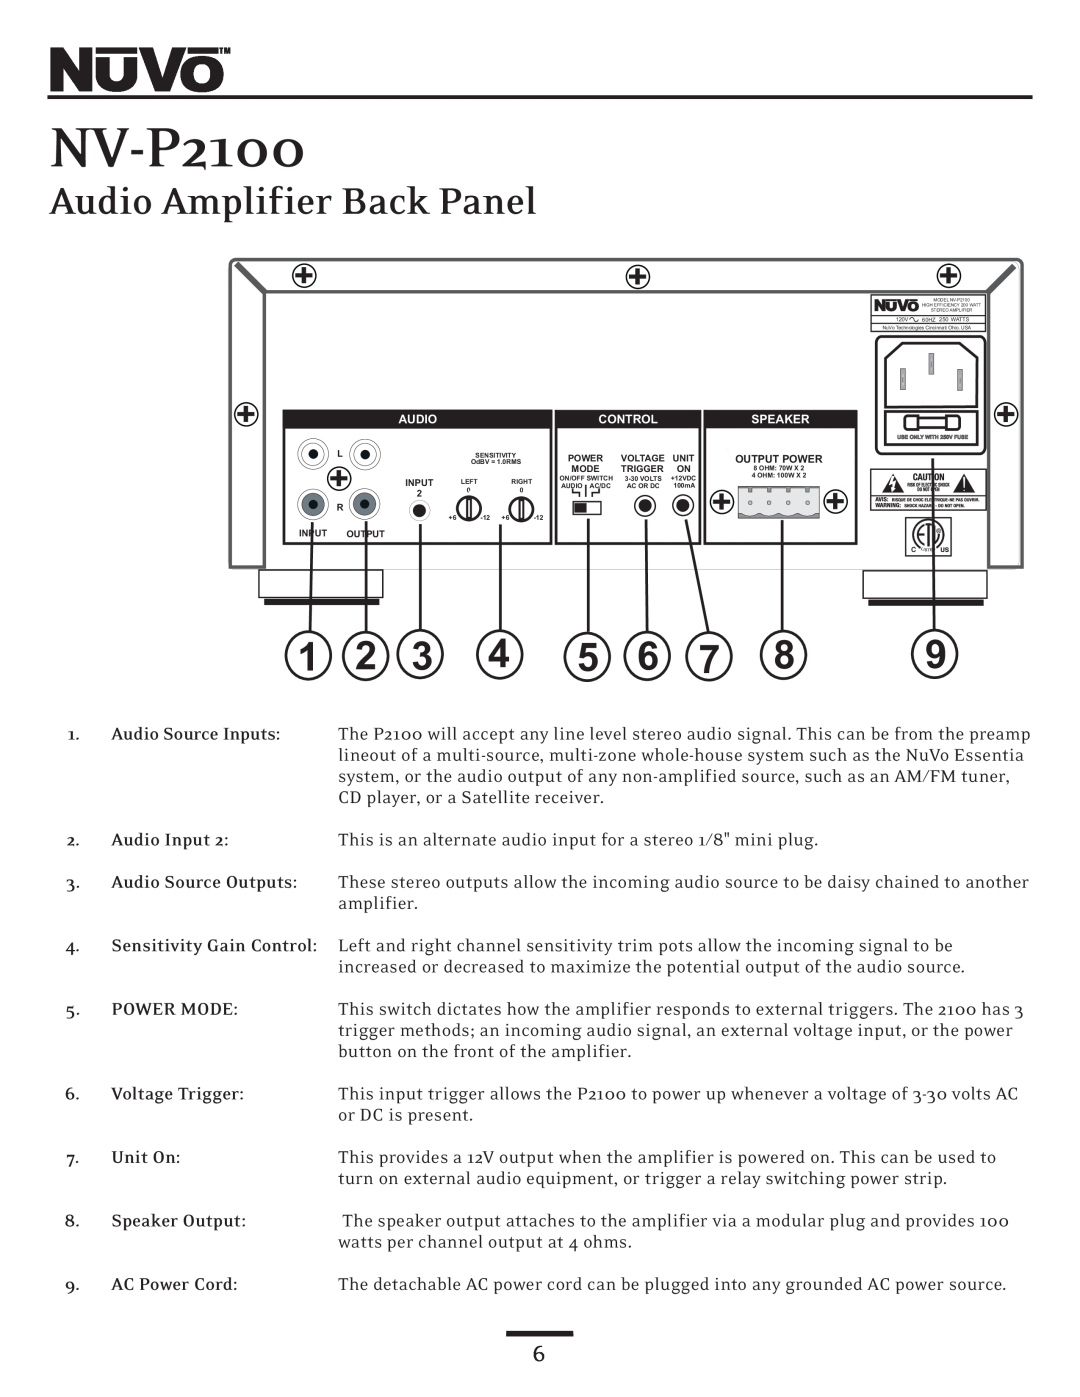 Nuvo NV-P2100 owner manual Audio Amplifier Back Panel, Unit On 